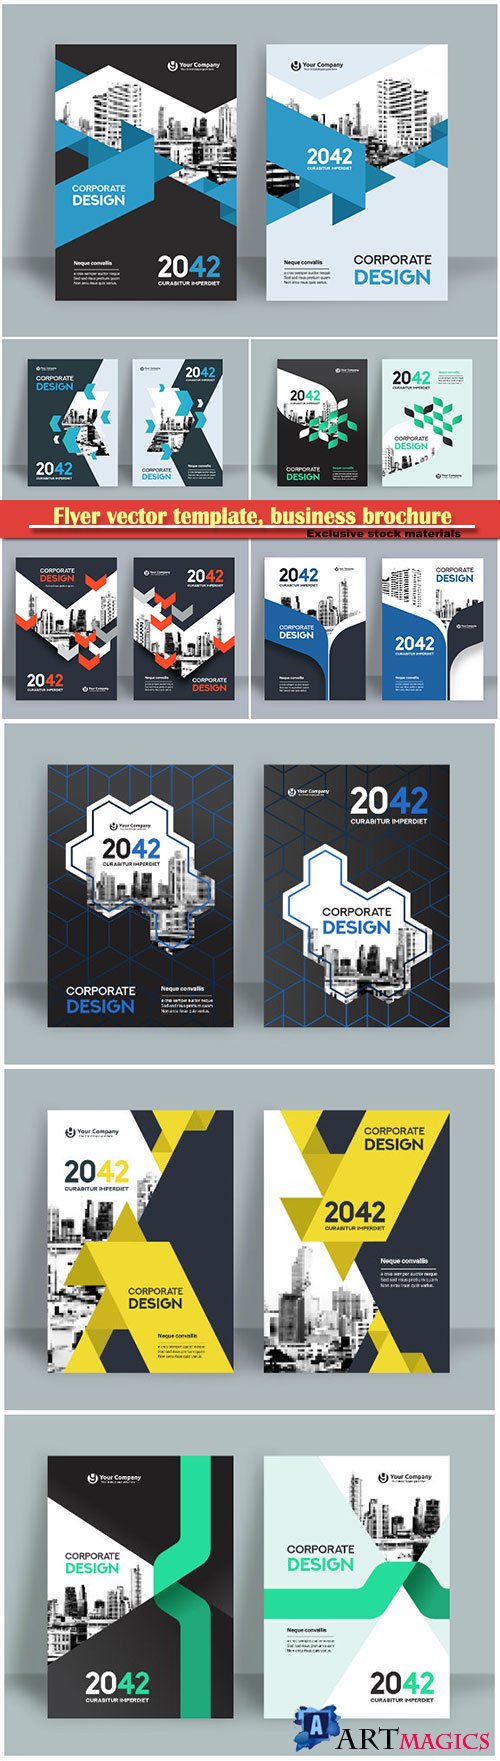 Flyer vector template, business brochure, magazine cover # 10